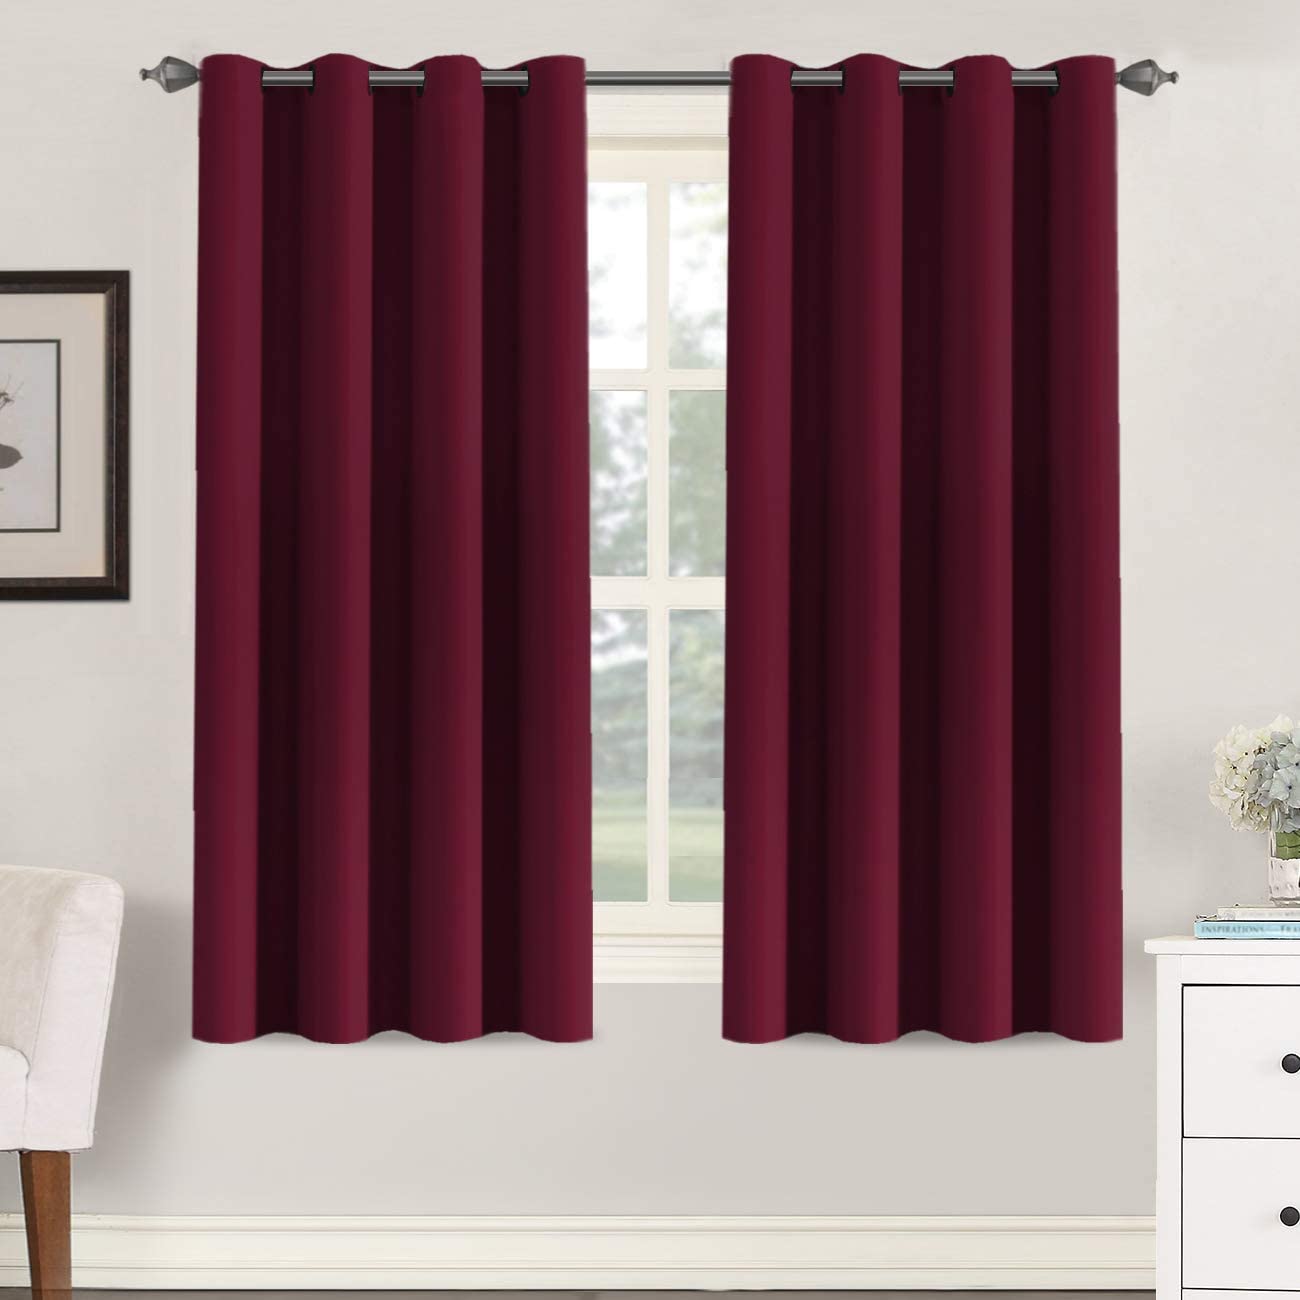 Amazon winterize your rental blackout thermal insulated curtains.jpg